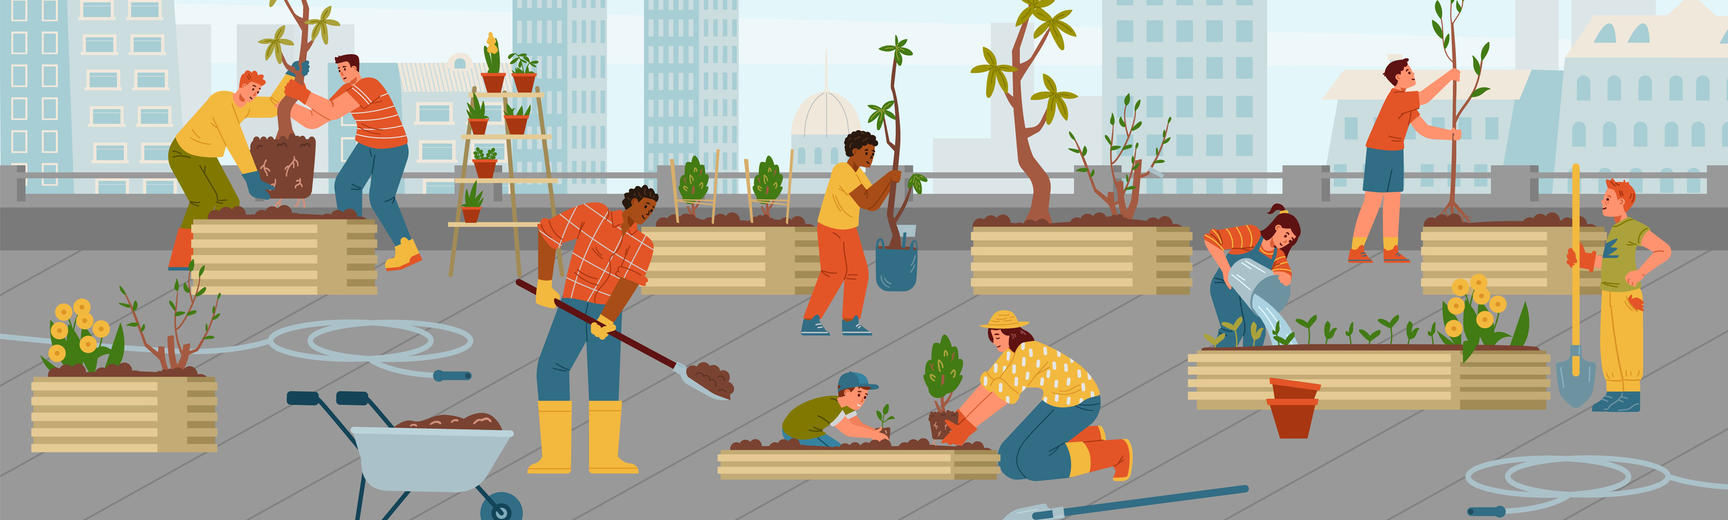 Cartoon of a community of people planting and tending raised beds in an urban environment